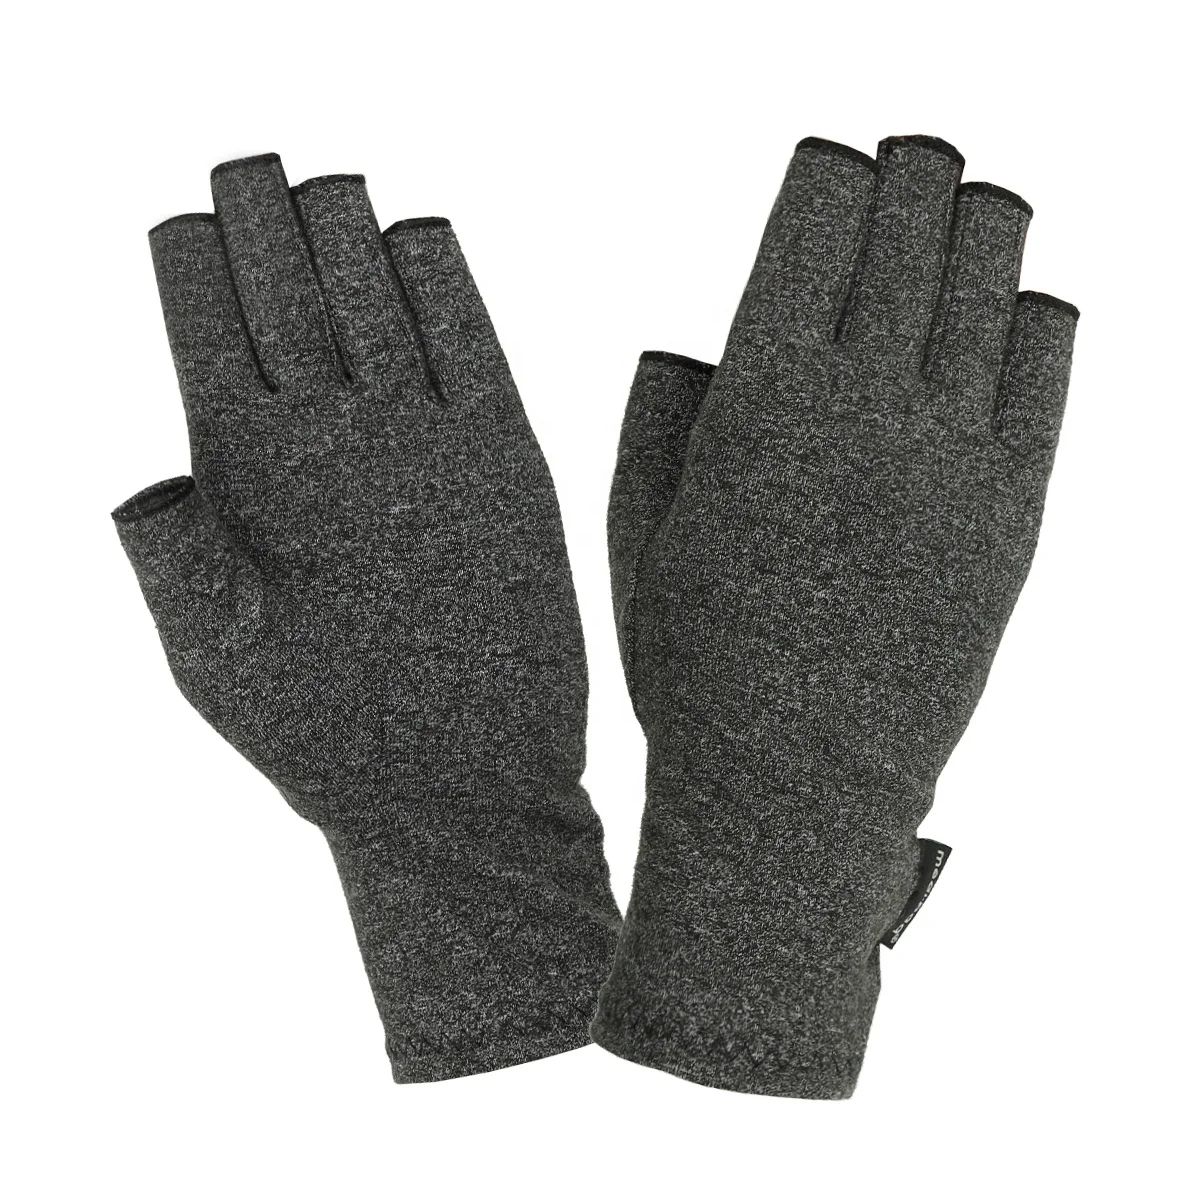 Anti-Arthritis Gloves (Pair) - Providing Warmth and Compression to Help Increase Circulation Reducing Pain and Promoting Healing